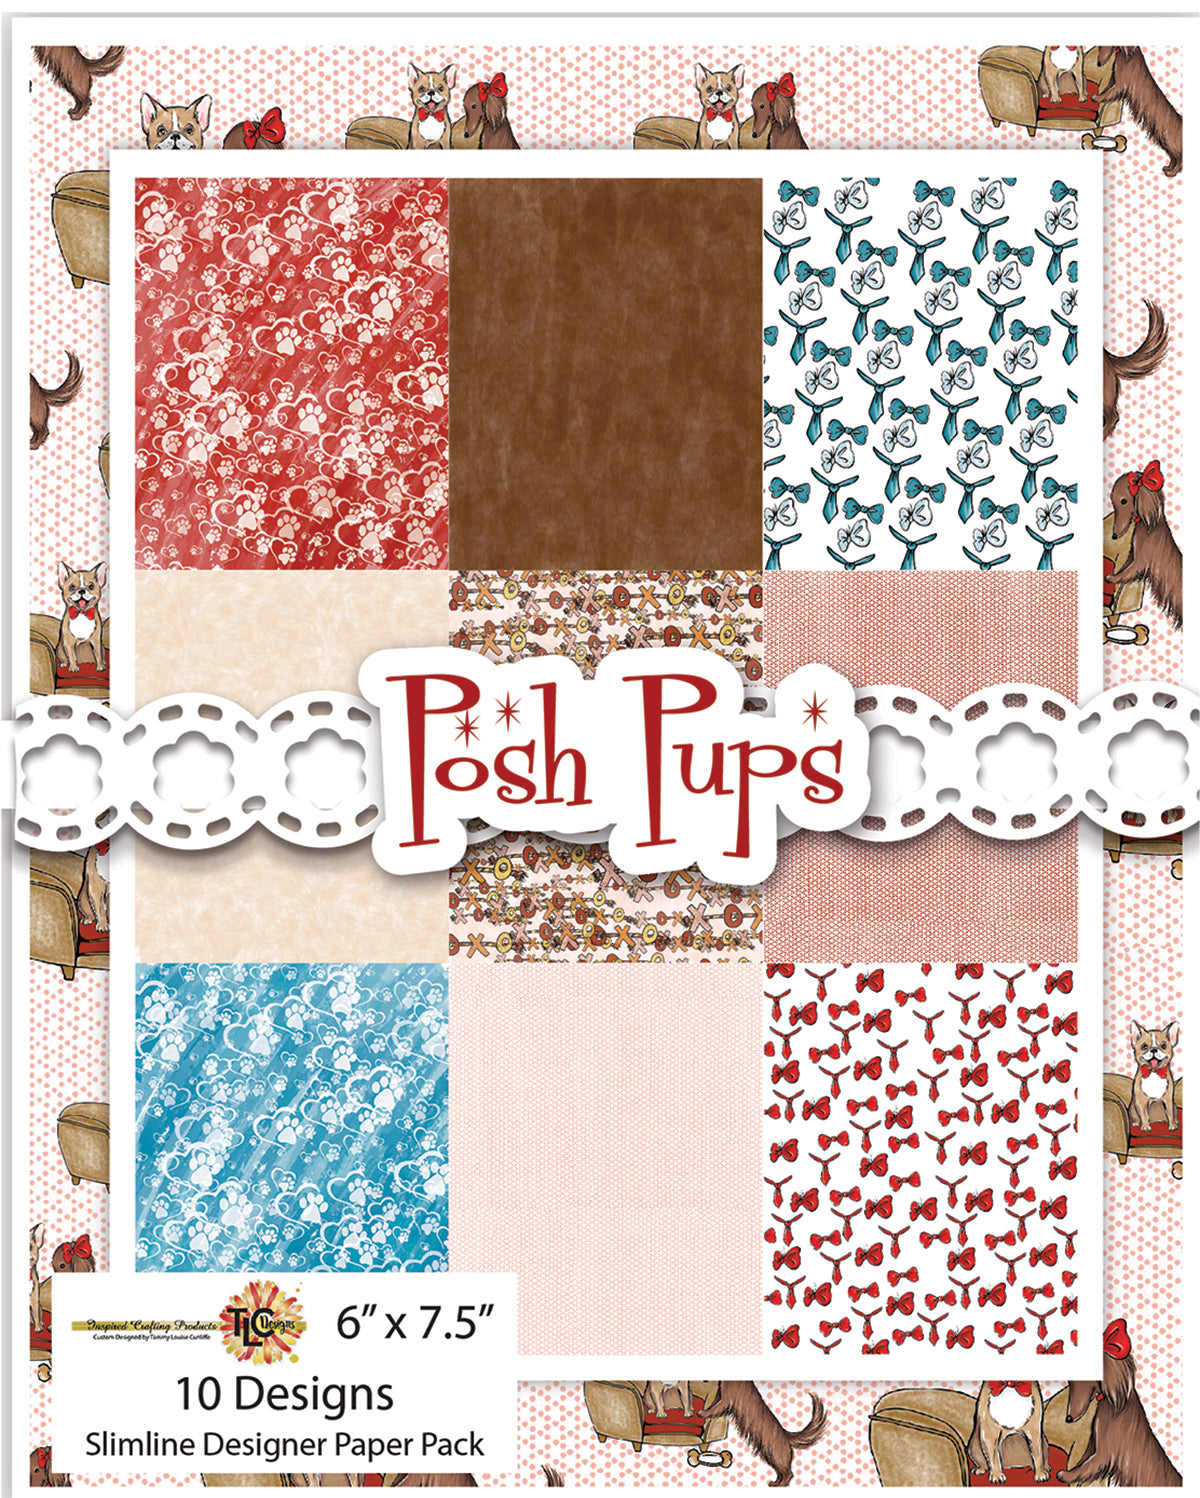 It's Posh Puppy time at TLCDesigns.shop!  Perfectly coordinated digital papers with 10 different designs in the new all purpose size!  Love A2? Create in 6" x 6"?  Or do you love the Slimline?  This paper pack will do it all!  The coordinated Posh Pups digital stamp set will get the creative wheels turning when you create with both the stamps and the papers! 